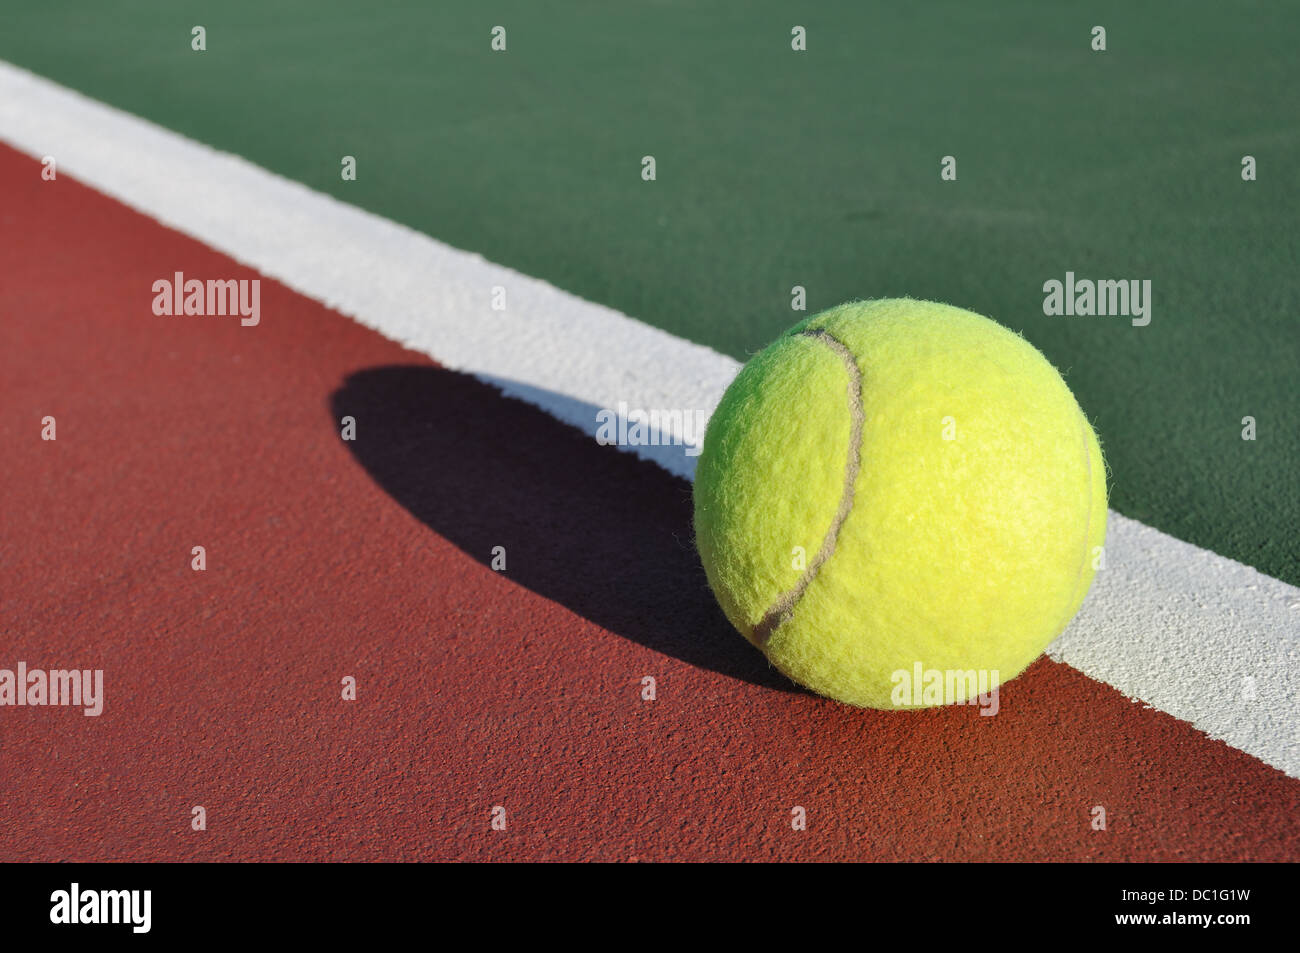 Tennis ball on a court at the baseline Stock Photo